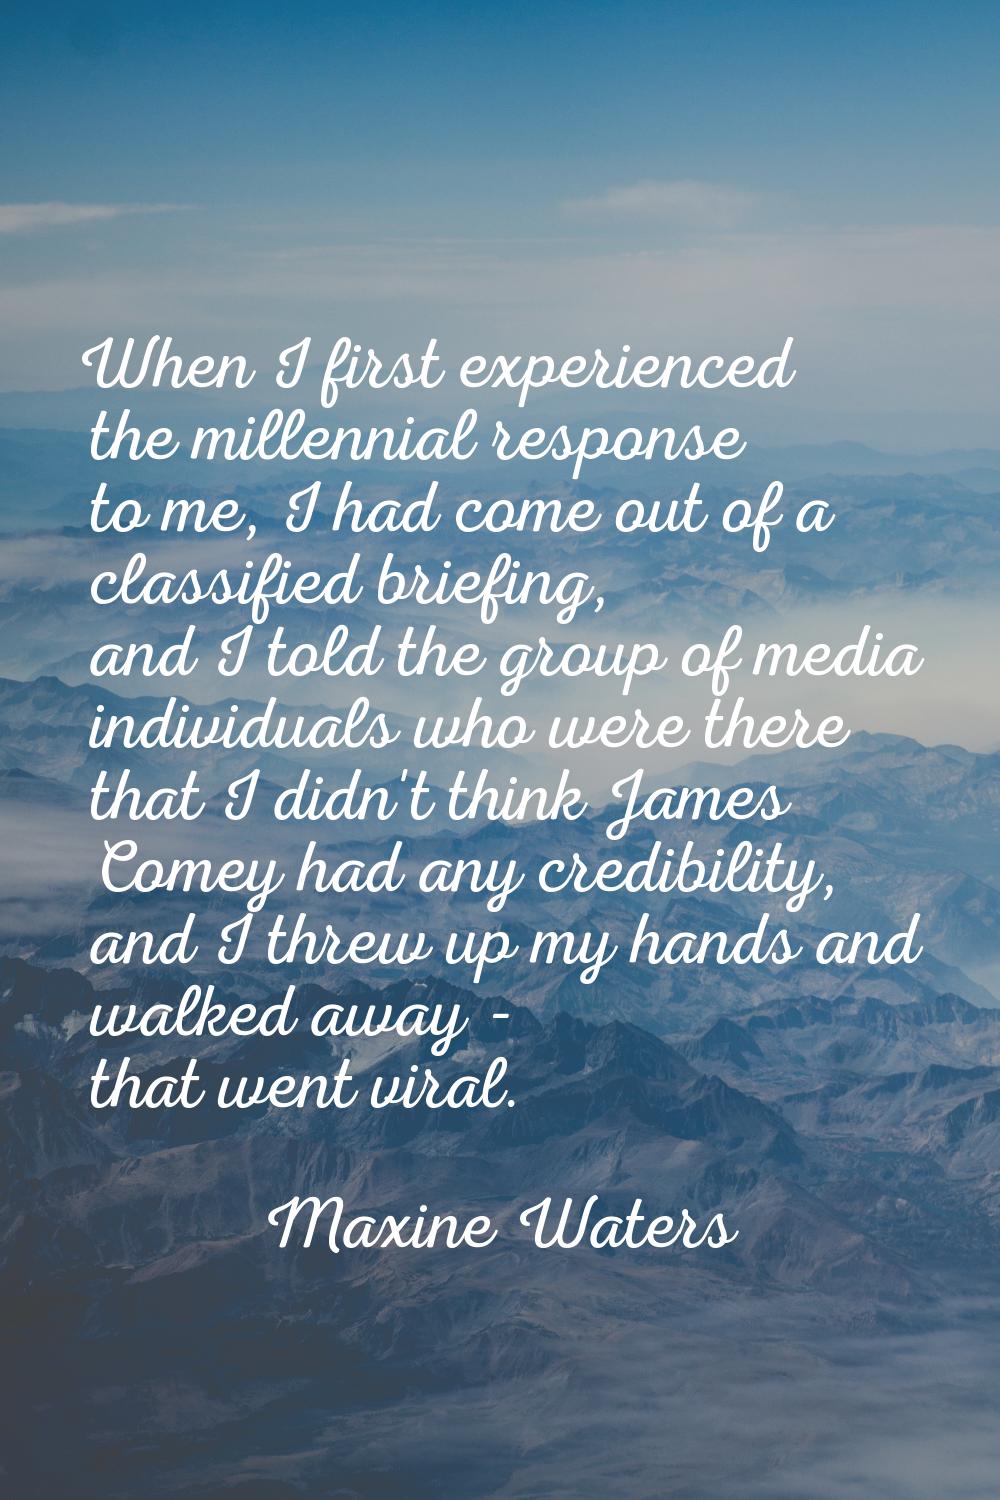 When I first experienced the millennial response to me, I had come out of a classified briefing, an